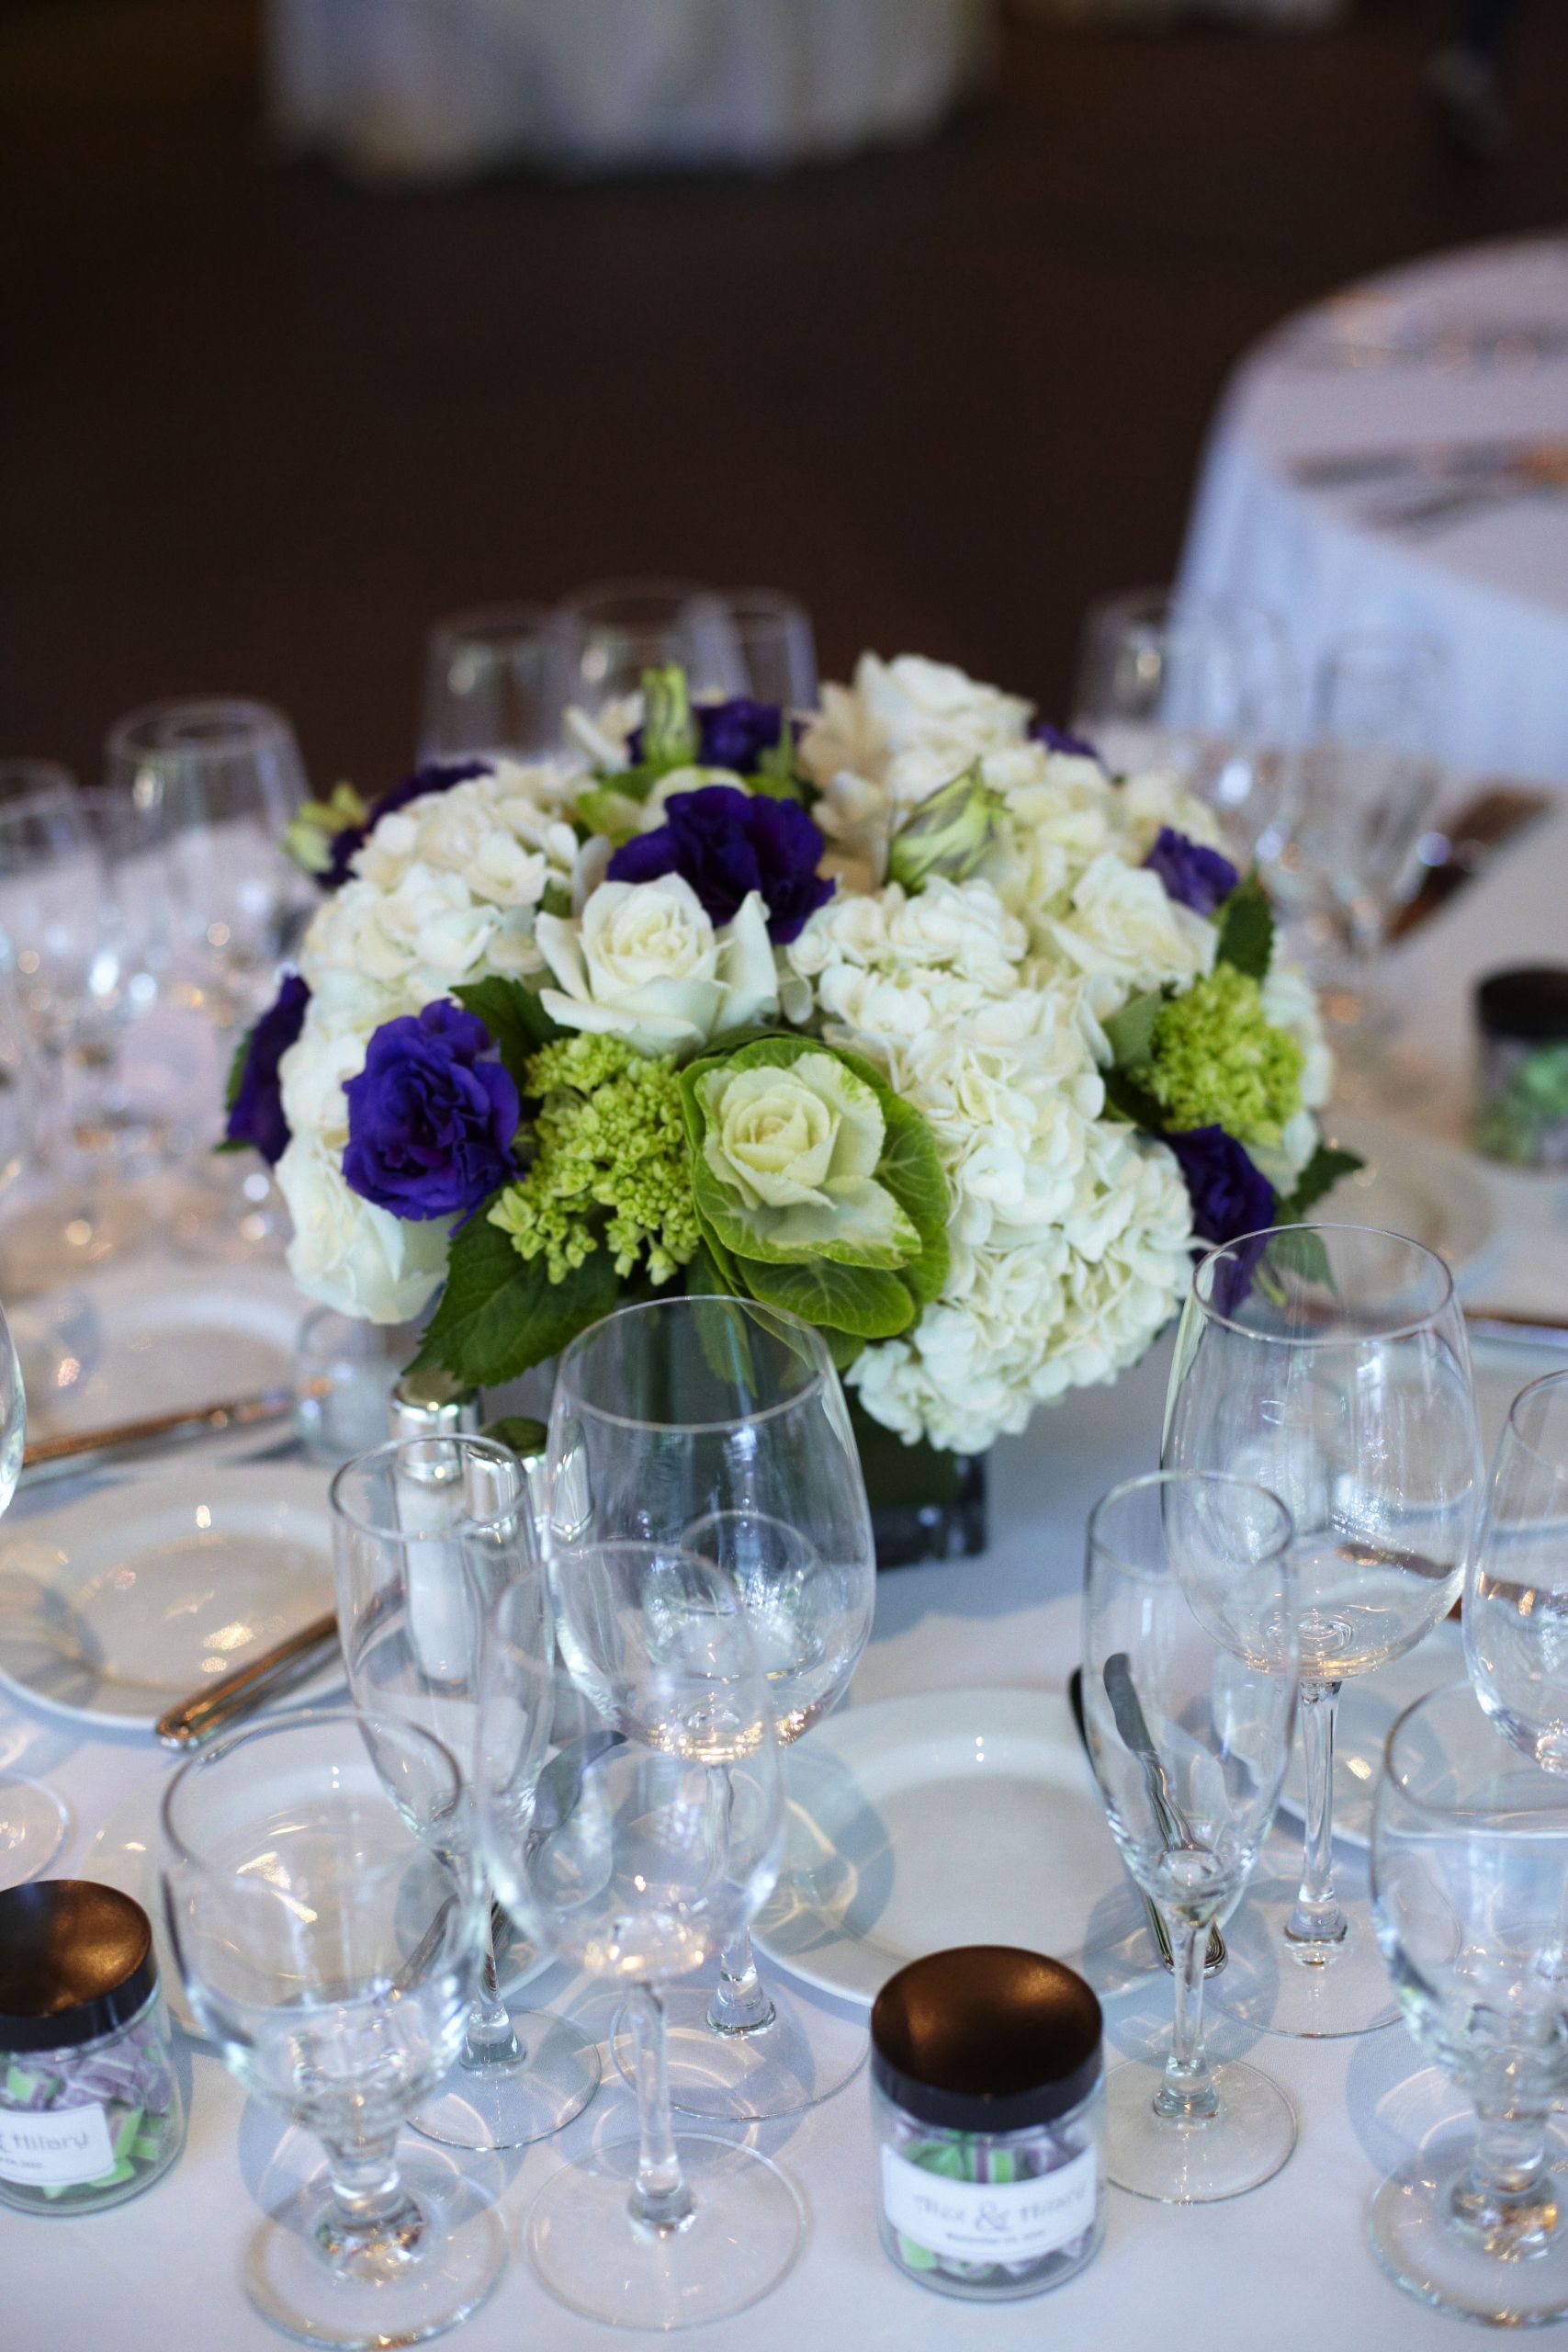 White Flower Wedding Centerpieces
 White Purple and Green Low Centerpieces